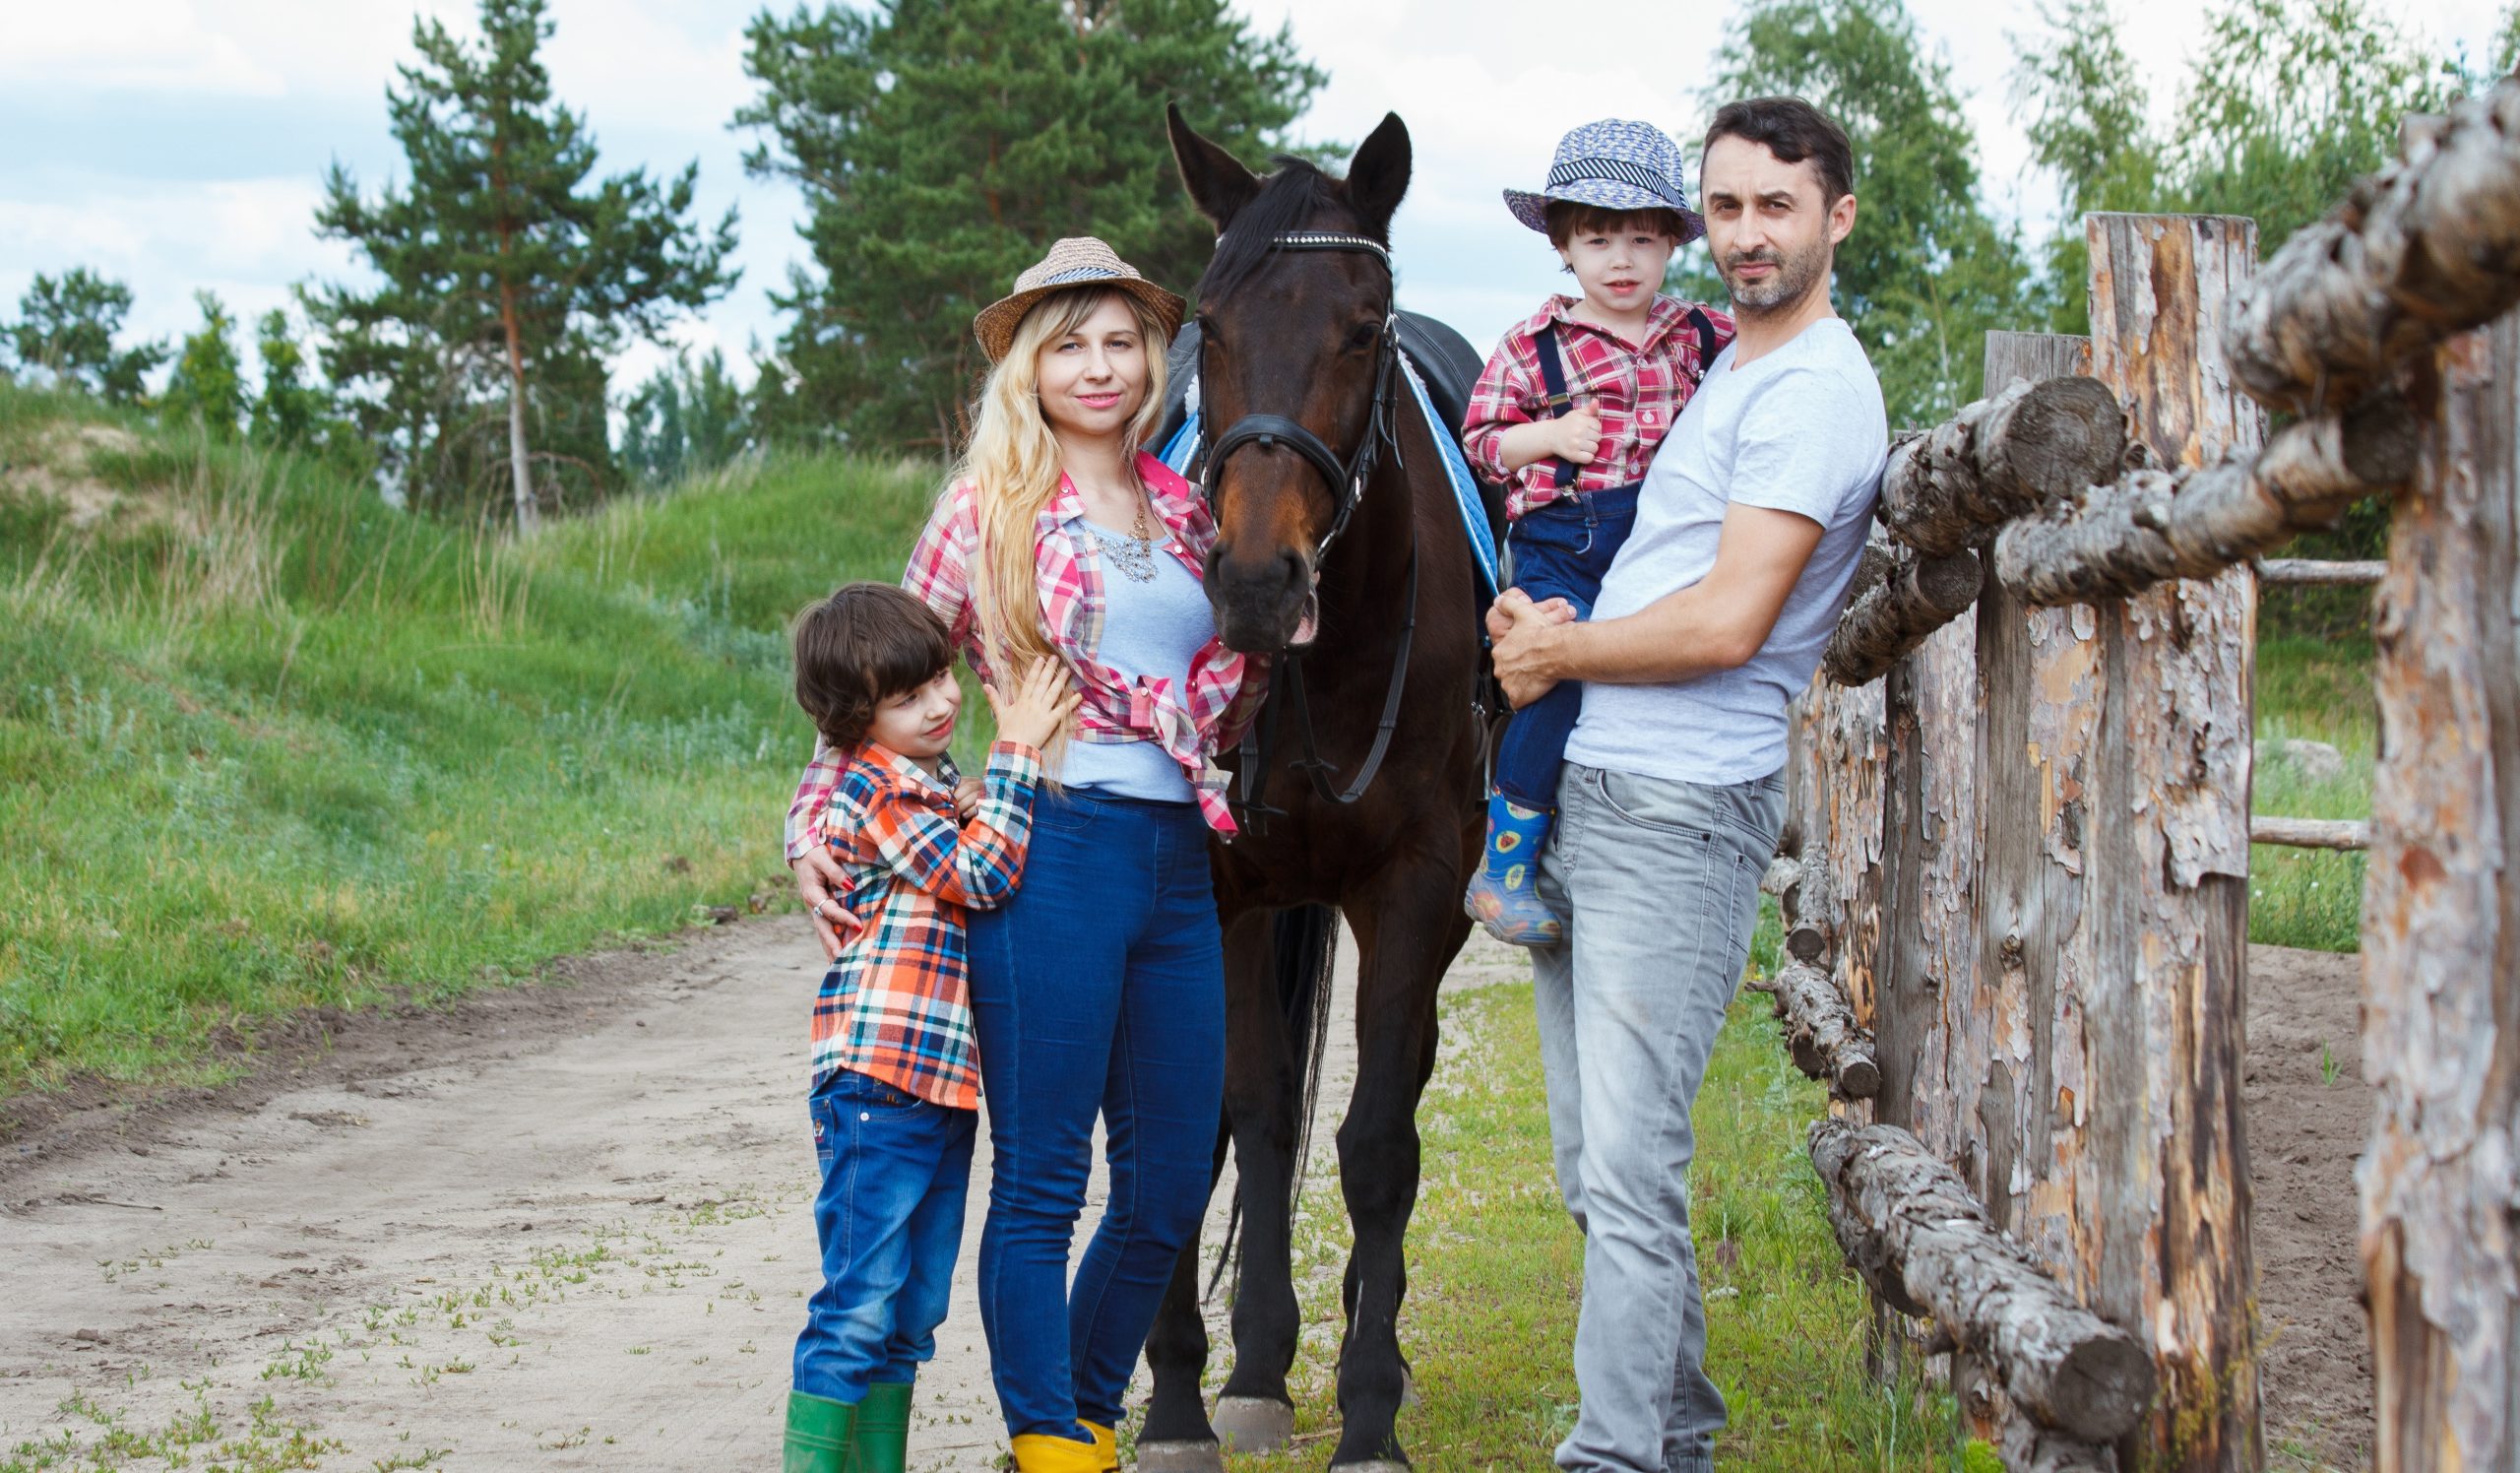 a family of four on a dirt road in a country setting. a mom with long wavy hair standing next to and hugging a horse that stands just a bit taller than her. The son is standing on the other side of his mom. The Dad stands on the other side of the horse with a smaller child in his arms. All are smiling and looking at the camera because they are happy knowing they are wearing minus bite all natural bug spray and the horse was just wiped down.